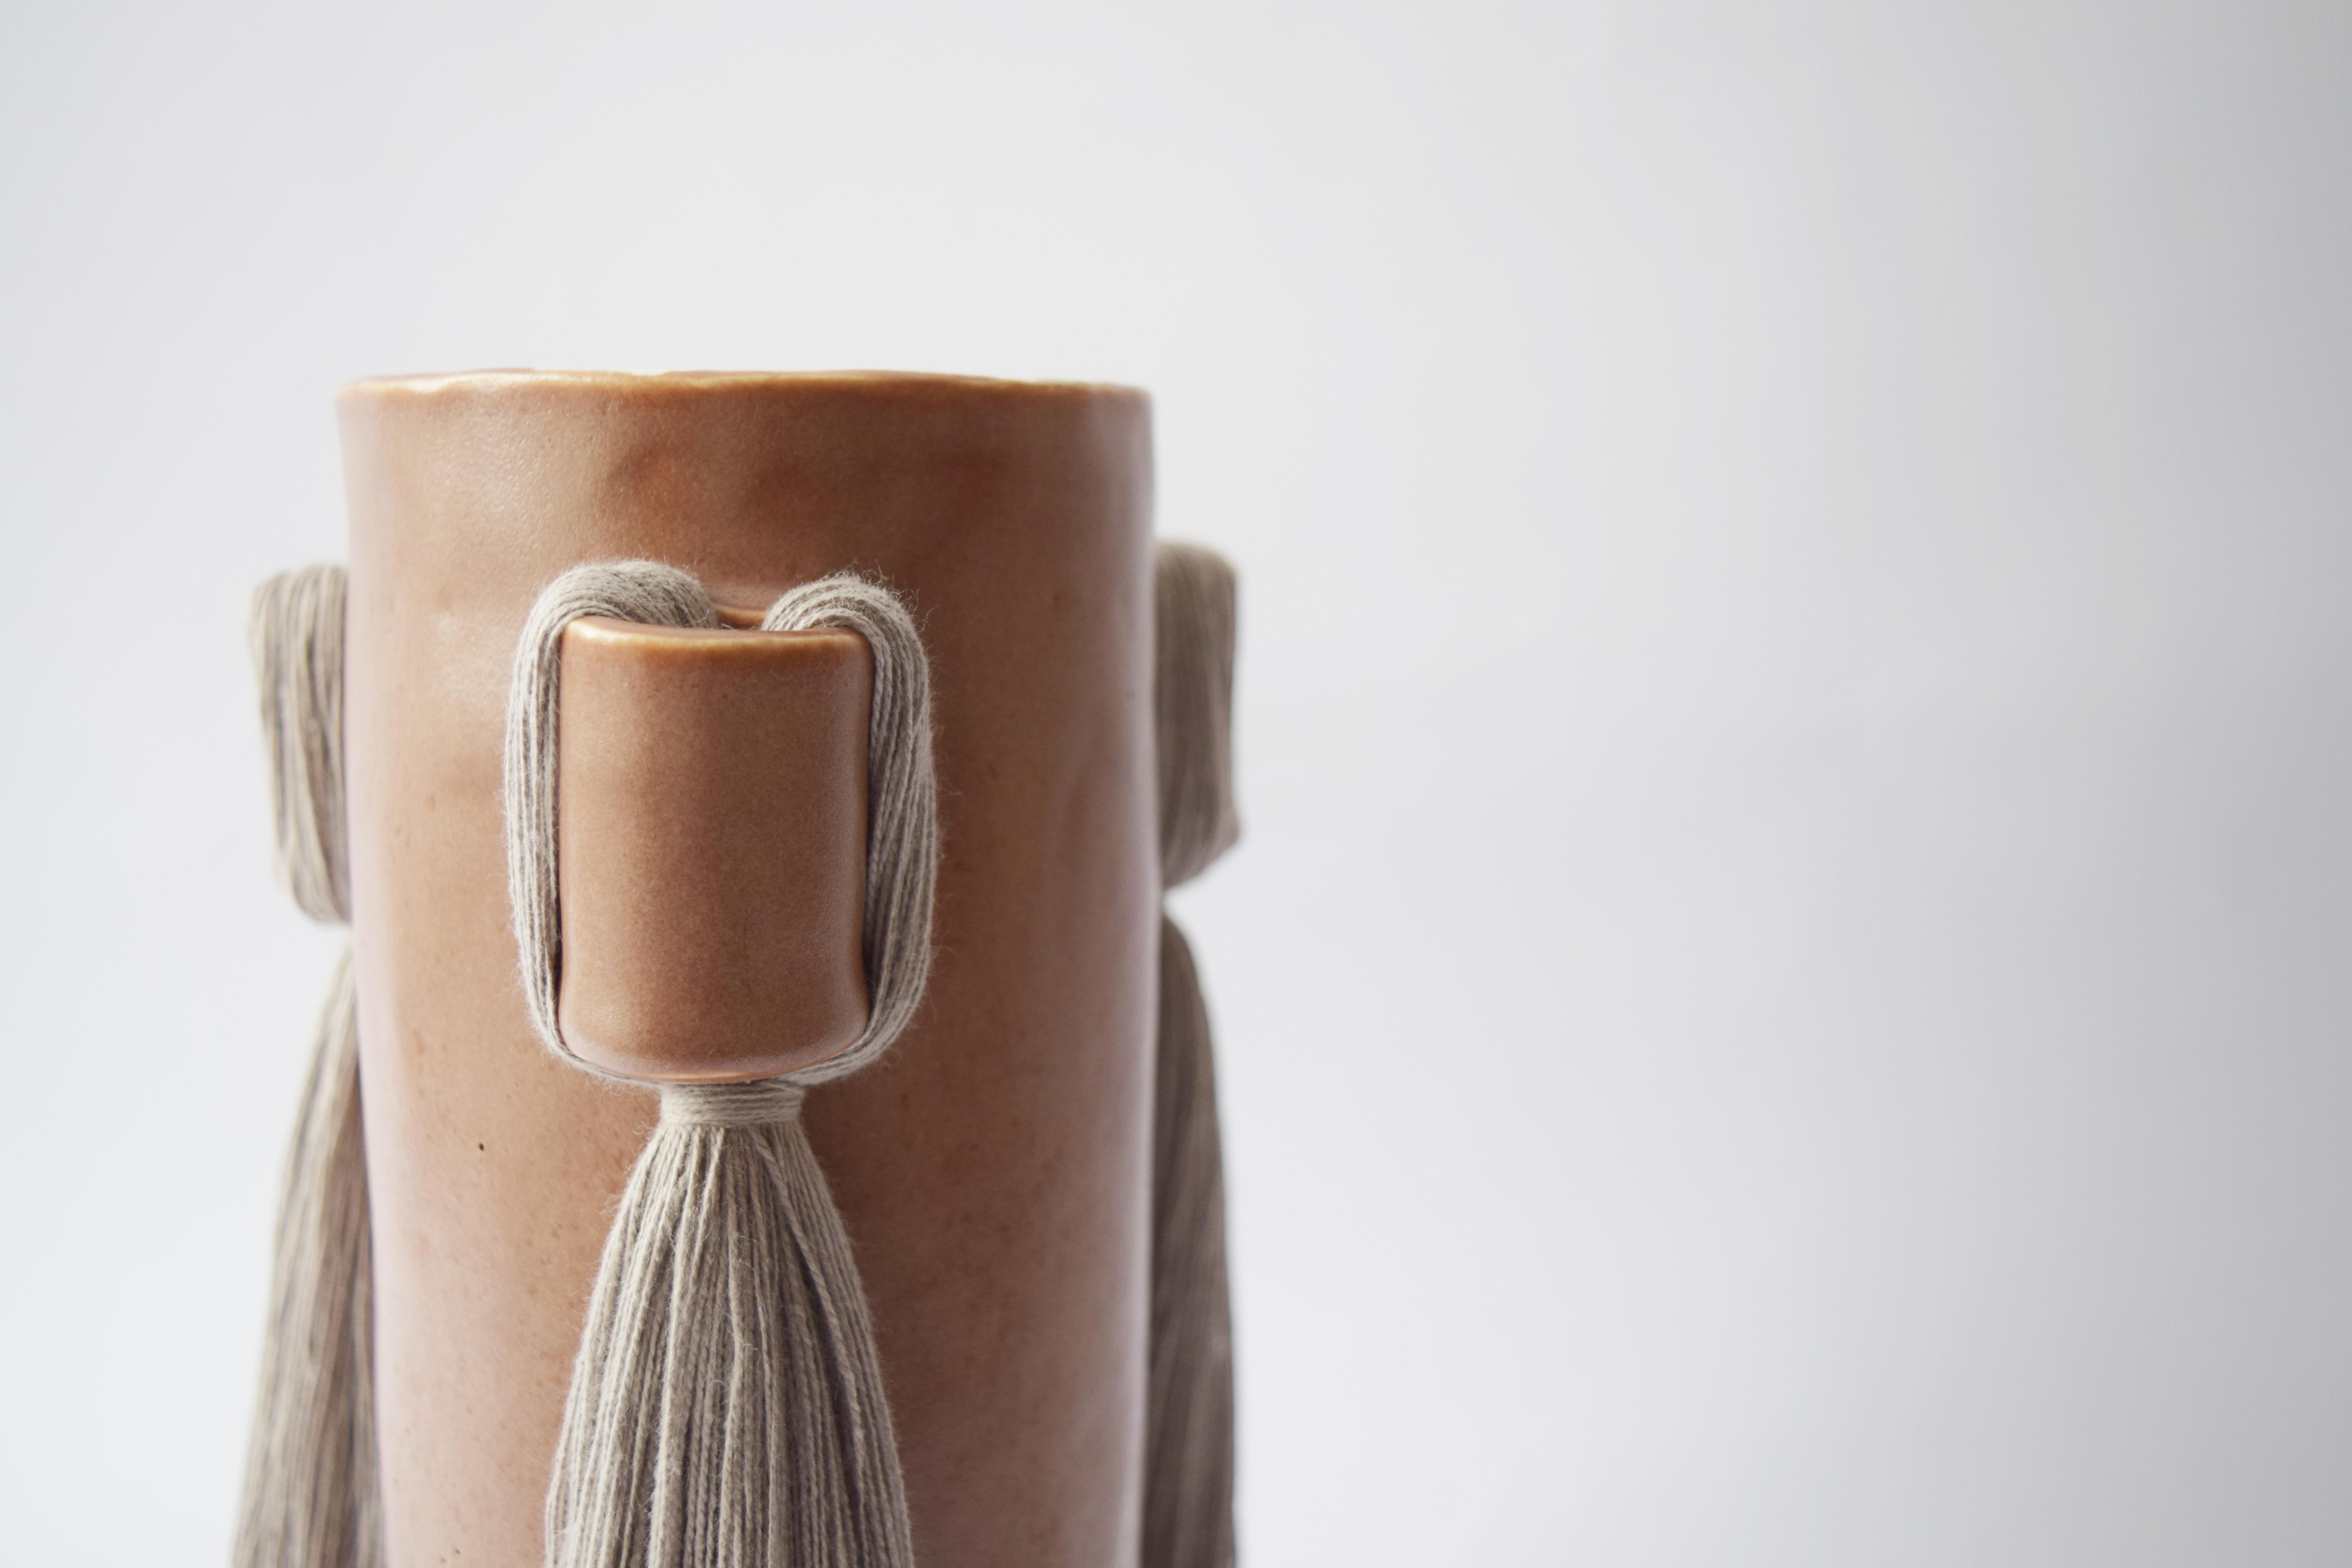 Hand-Crafted Handmade Vase #607 in Brown with Gray Cotton Fringe